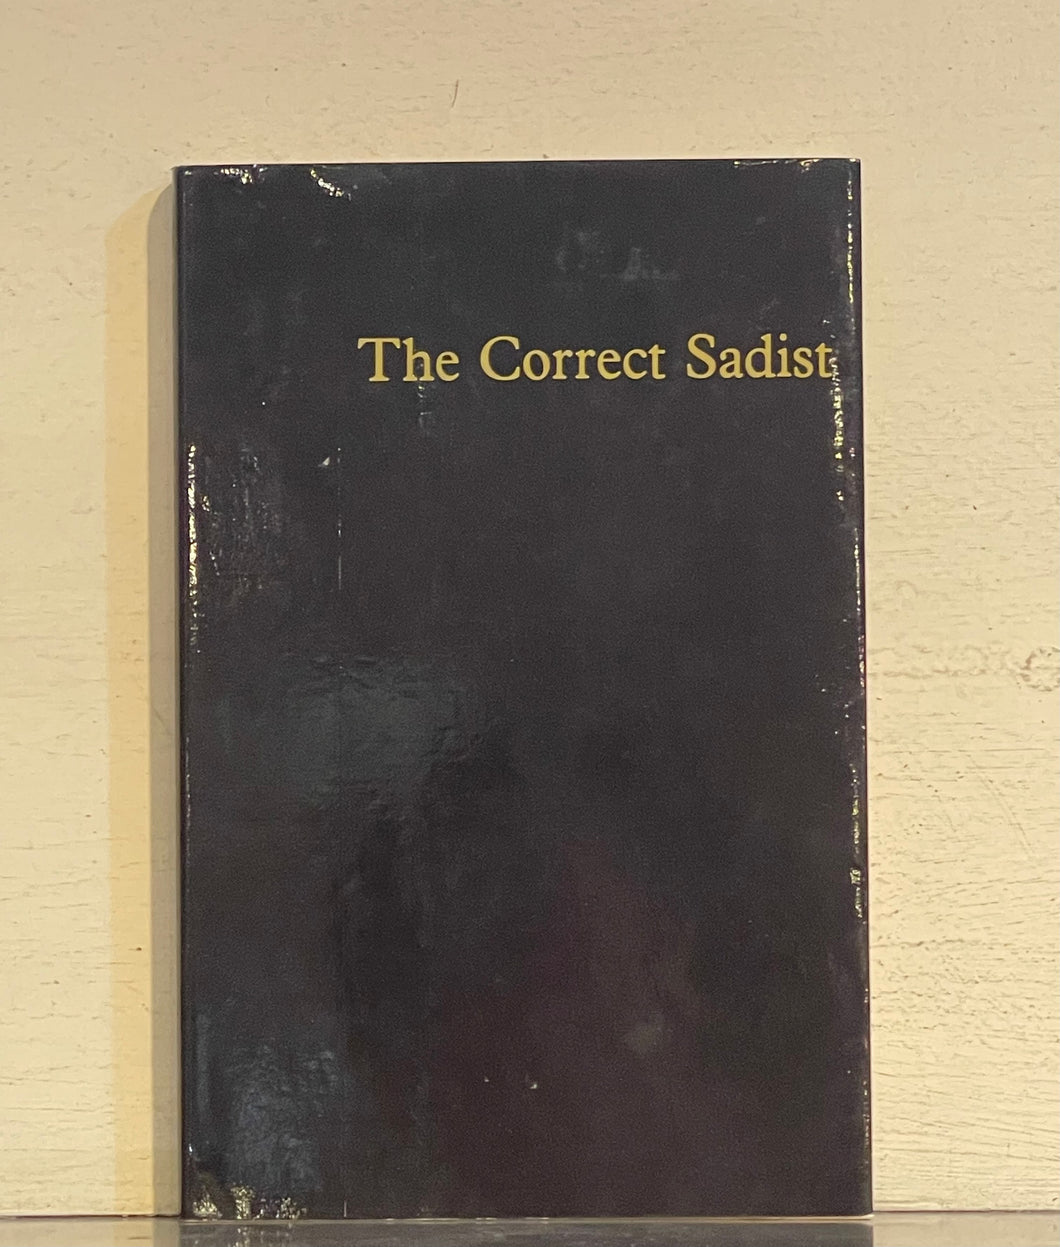 THE CORRECT SADIST BY TERENCE SELLERS